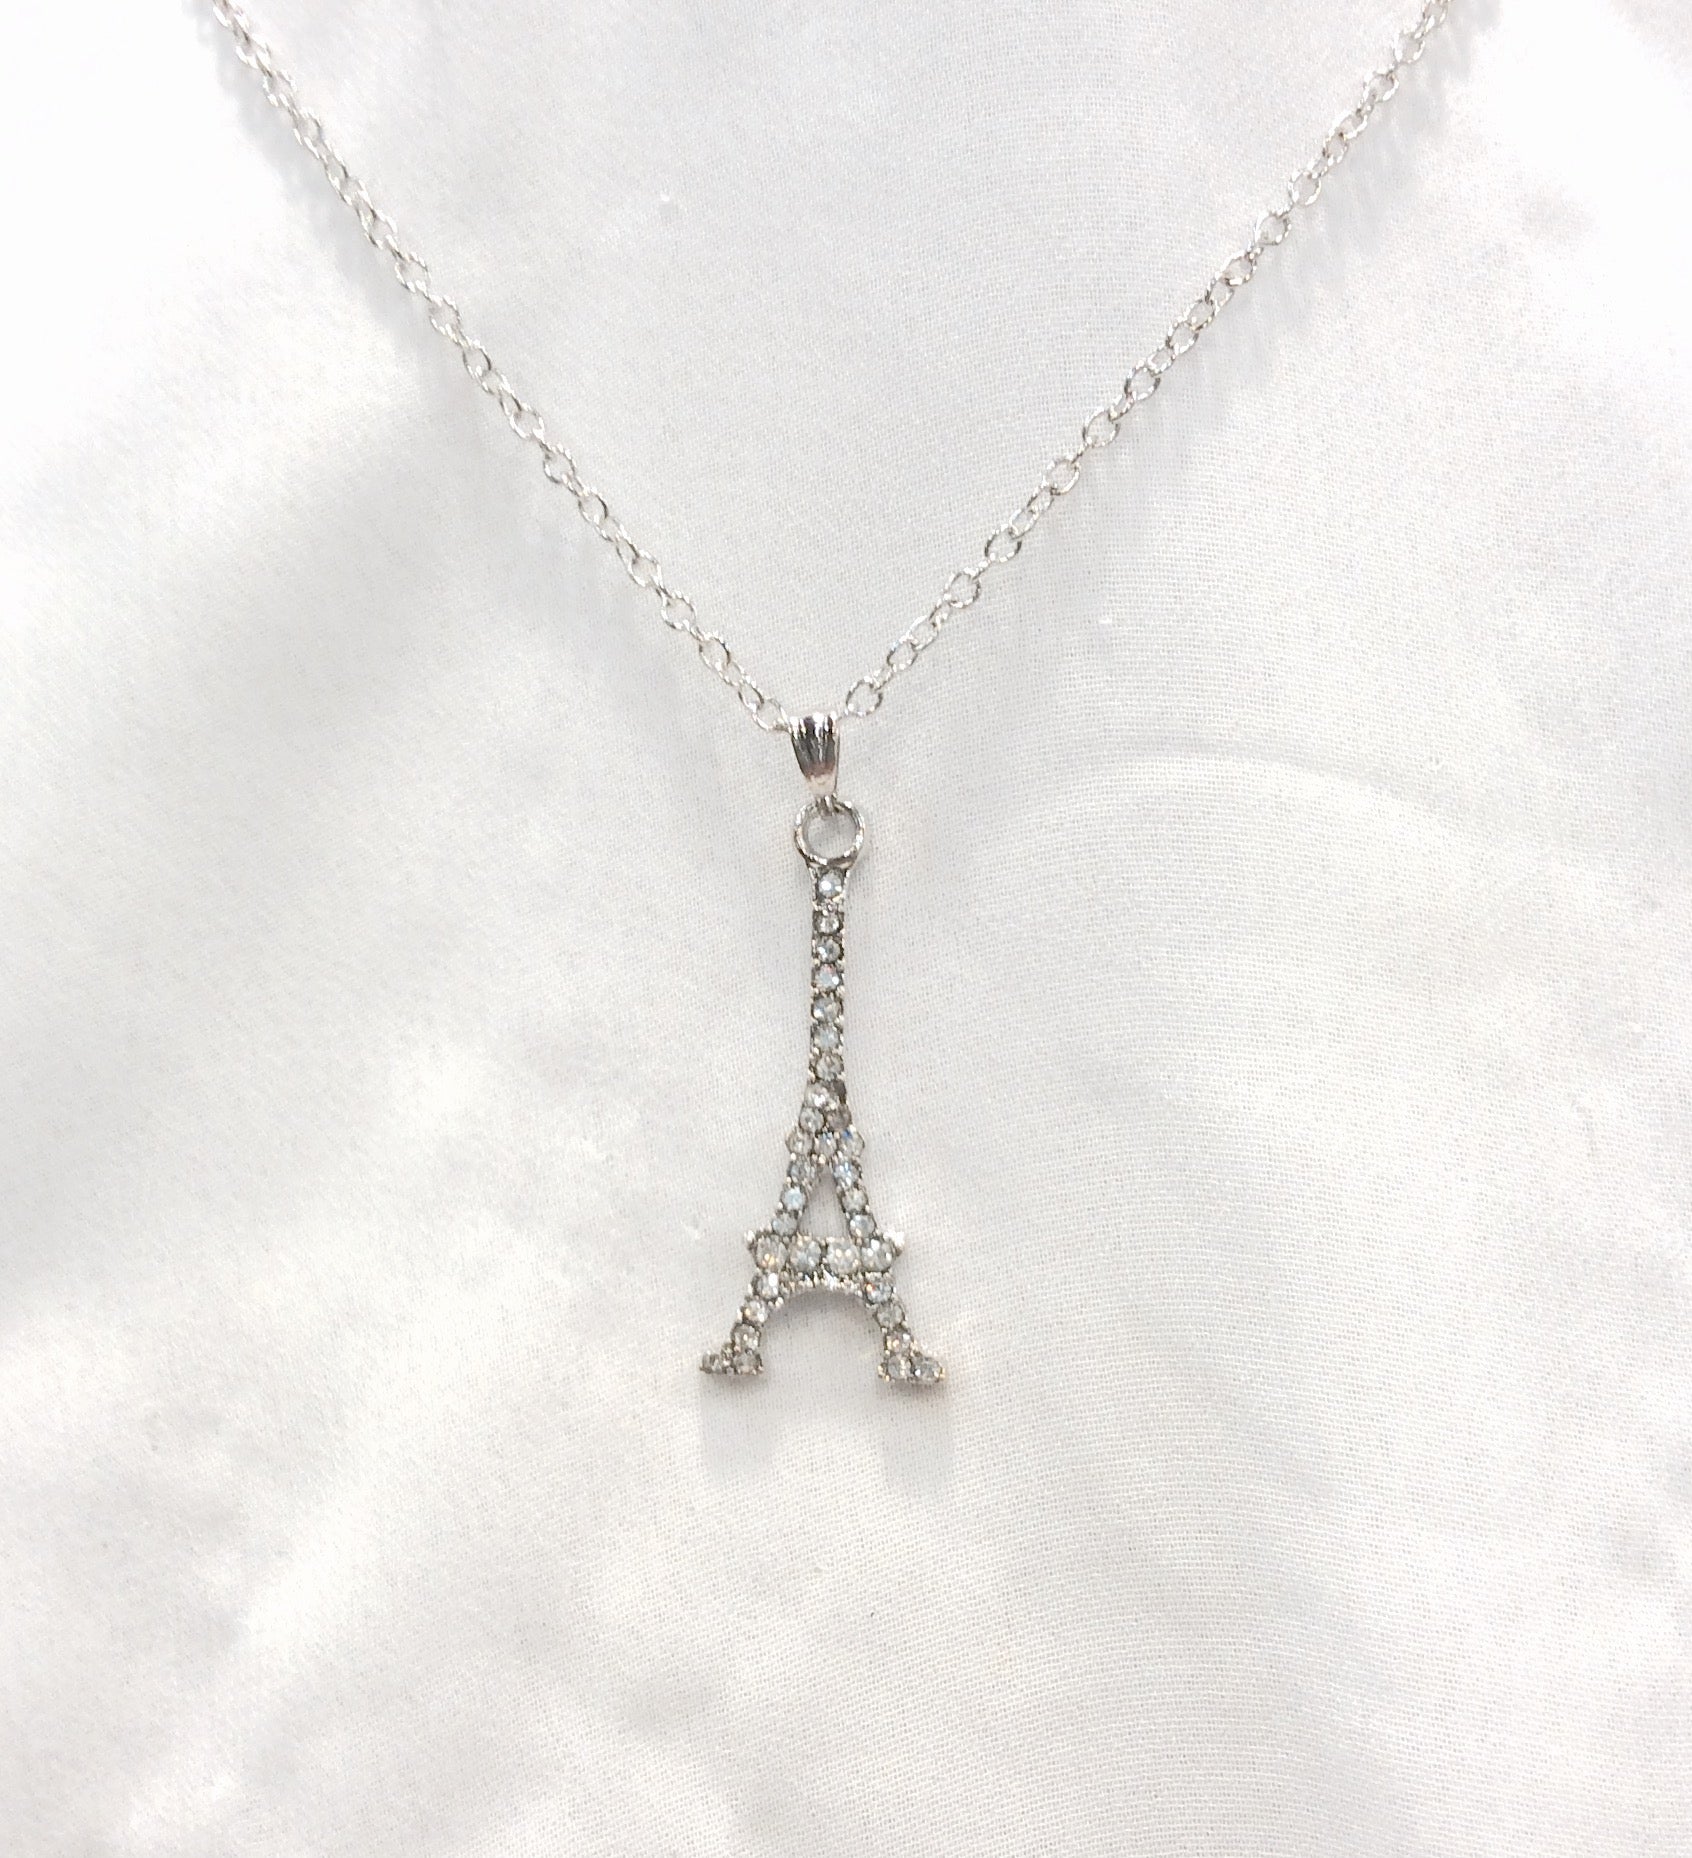 Eiffel Tower Necklace #28-11187S